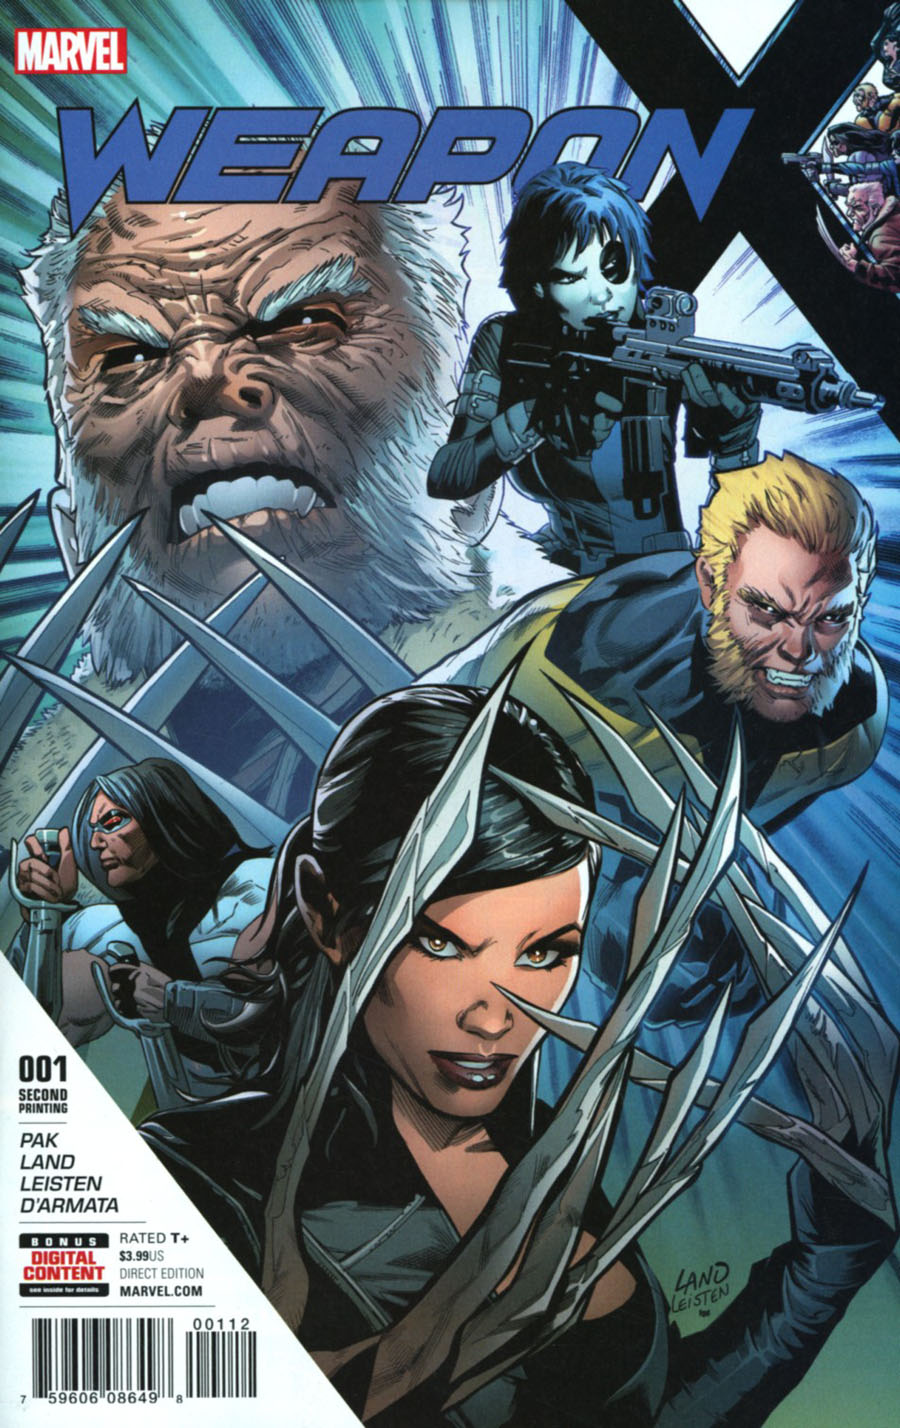 Weapon X Vol 3 #1 Cover G 2nd Ptg Greg Land Variant Cover (Resurrxion Tie-In)